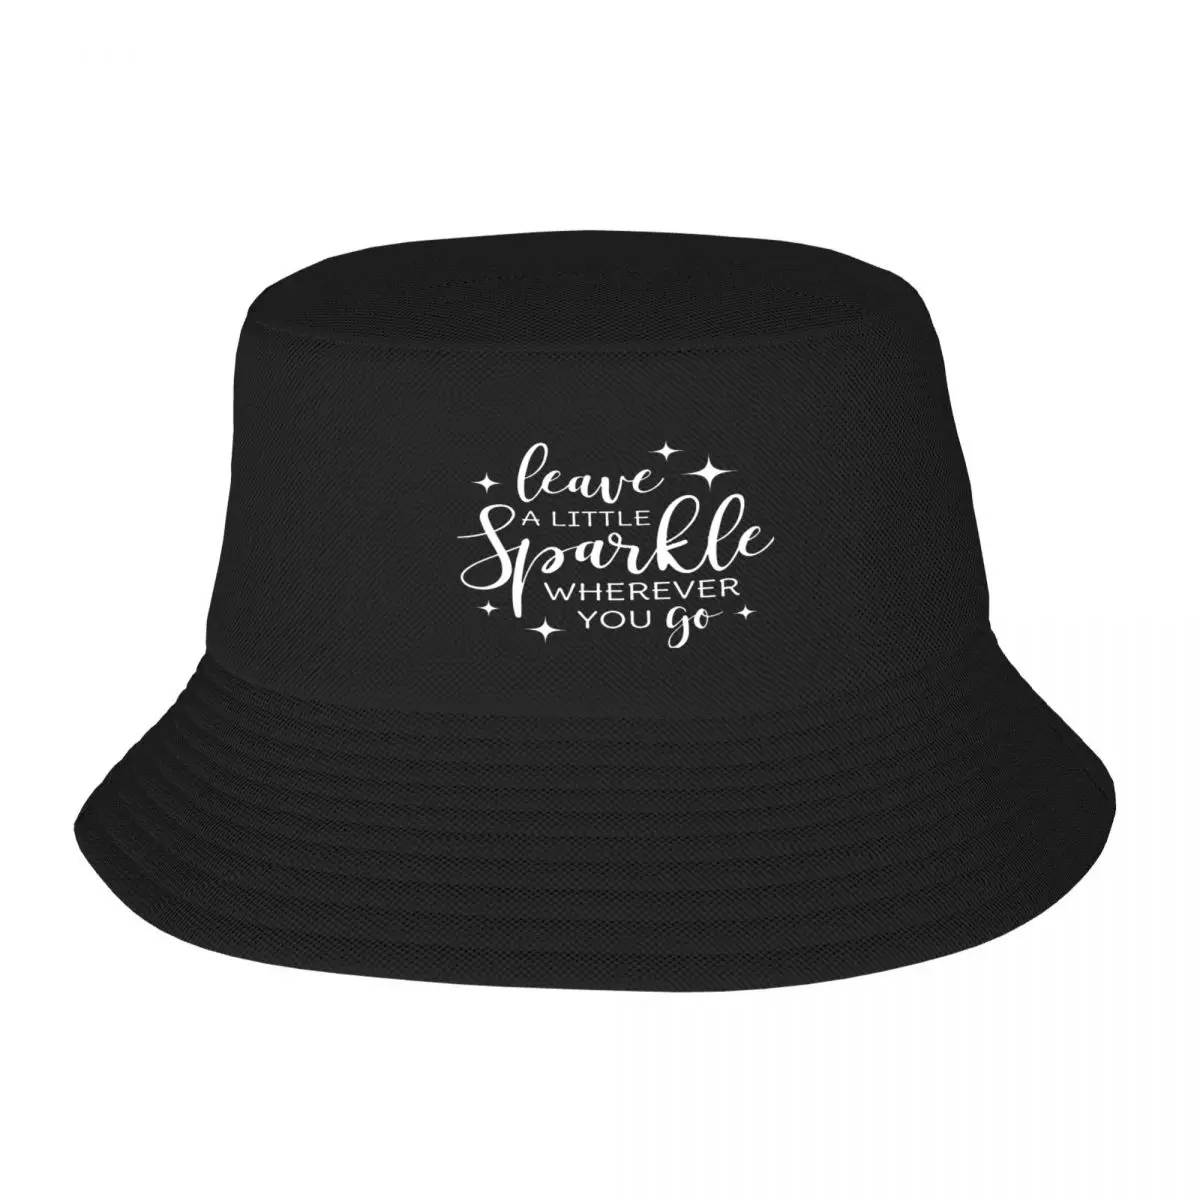 

Leave A Little Sparkle Wherever You Go Saying Fisherman's Hat, Adult Cap Customizable Soft For Daily Nice Gift